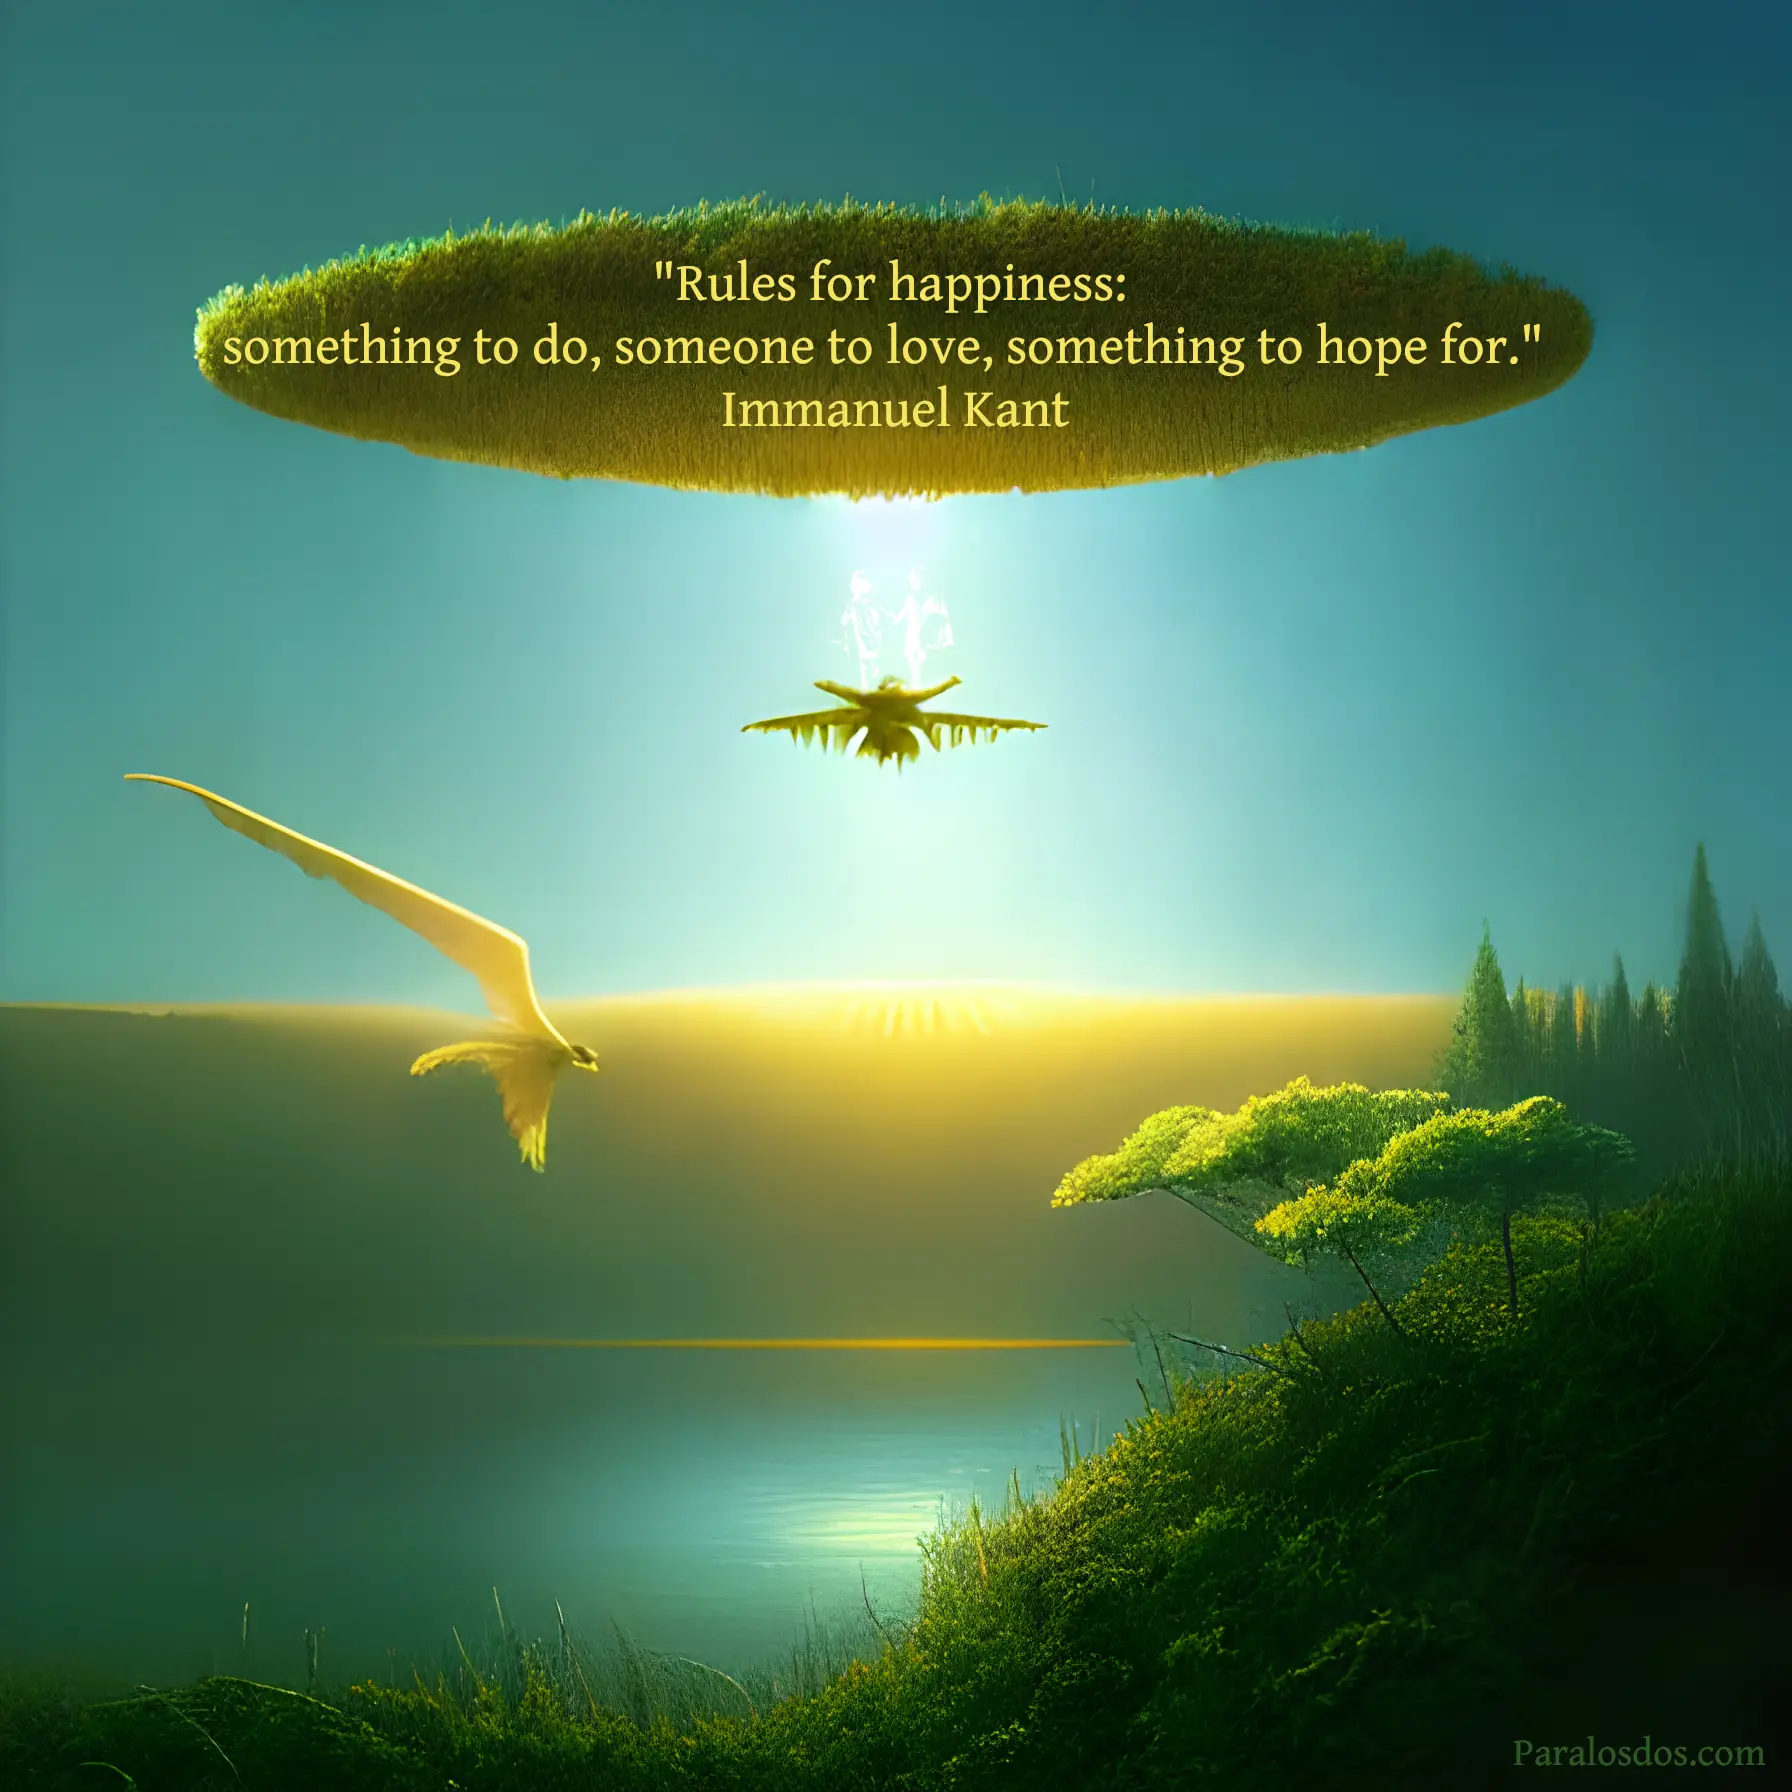 A fantastical artistic rendering of a majestic bird flying above a lake, while a disk of grass floats in the air. The quote reads: "Rules for happiness: something to do, someone to love, something to hope for." Immanuel Kant